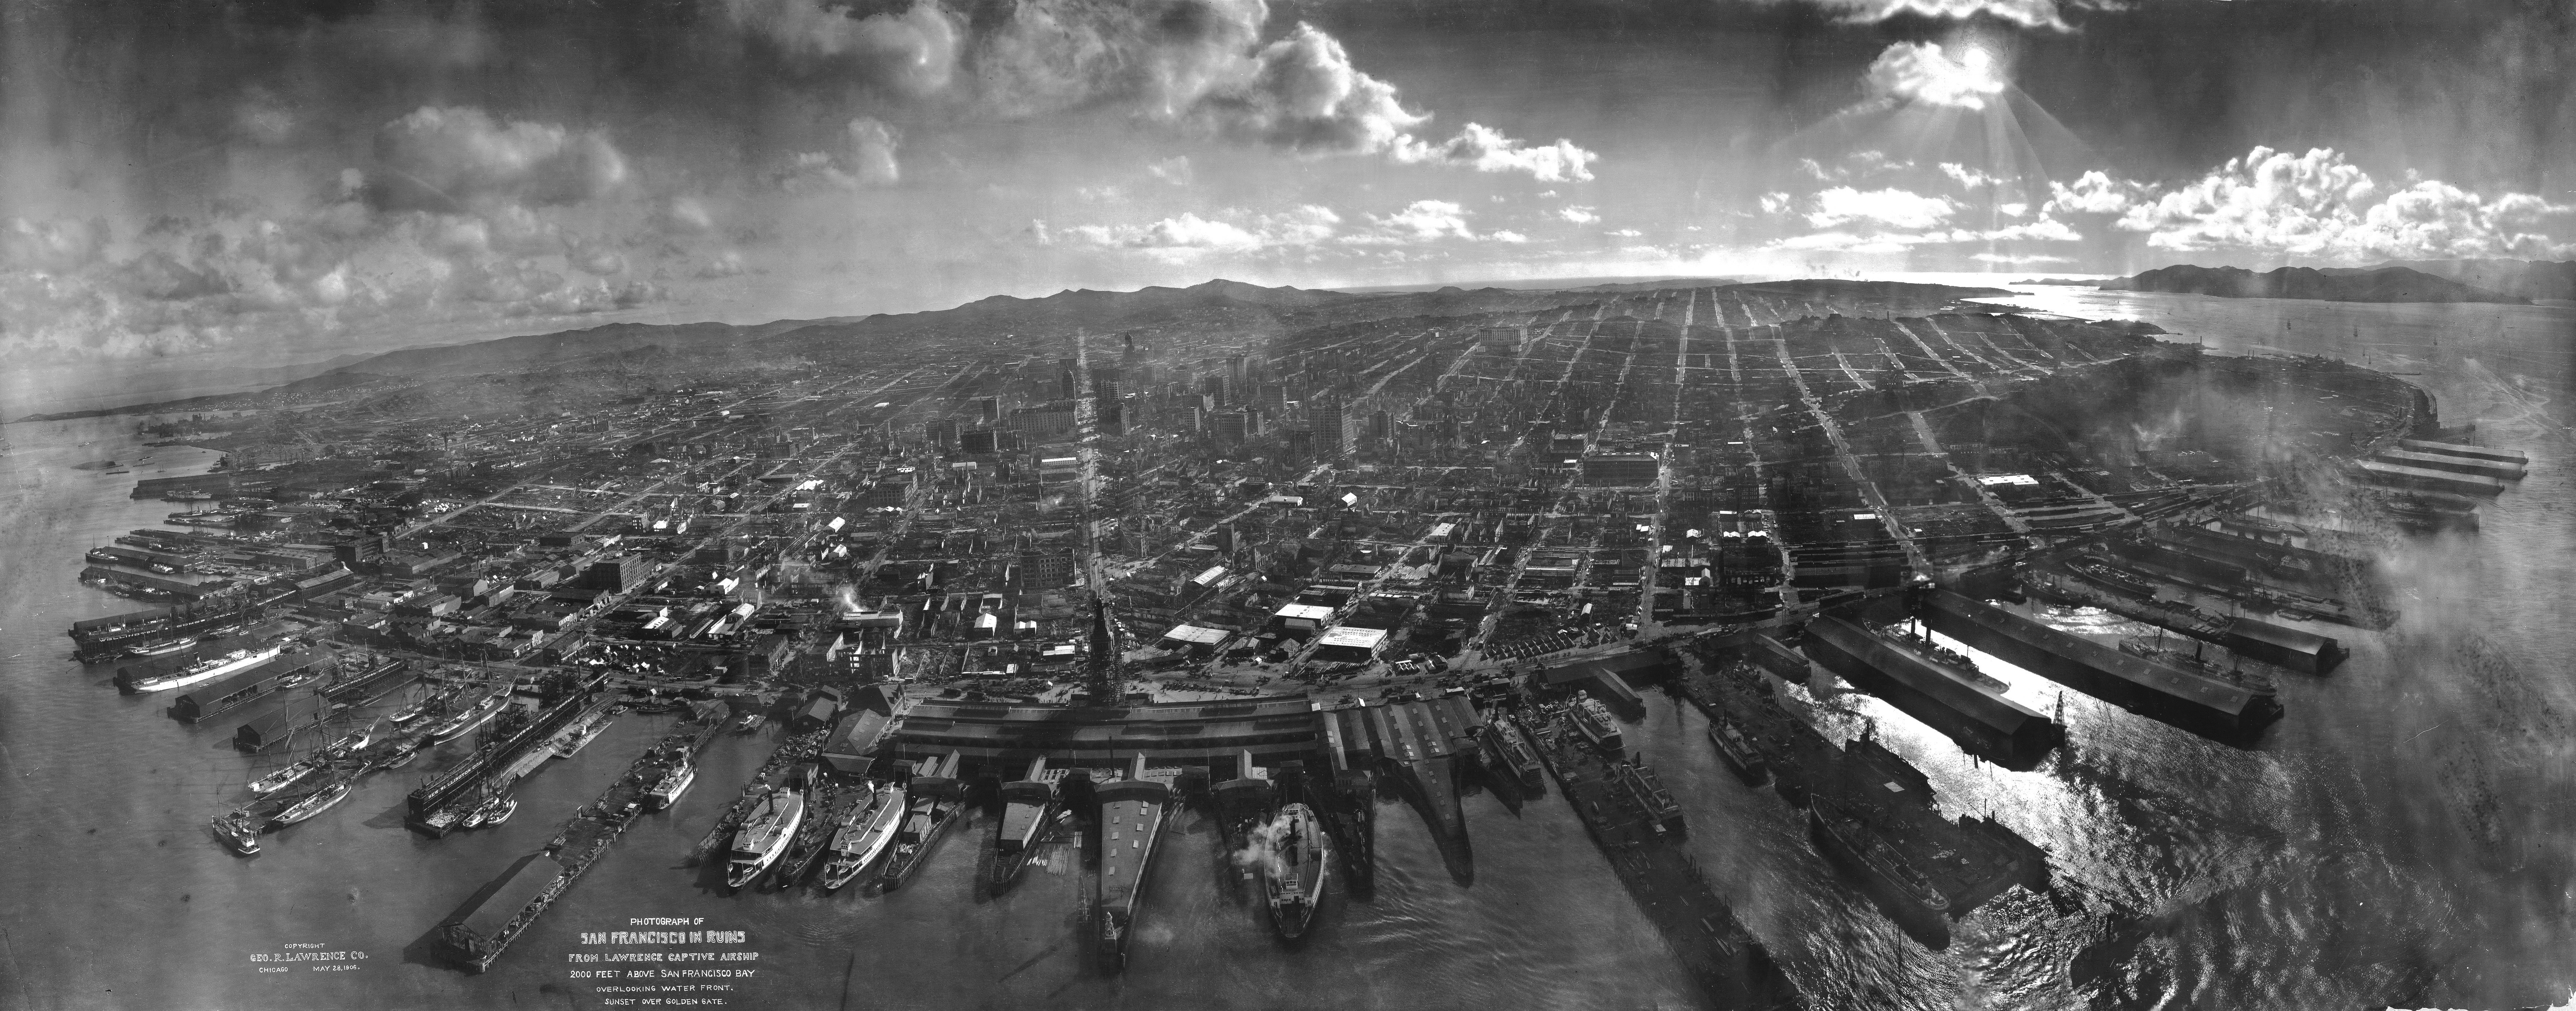 General 7000x2748 San Francisco waterfront earthquakes aerial view ruins USA monochrome vintage 1906 (Year)